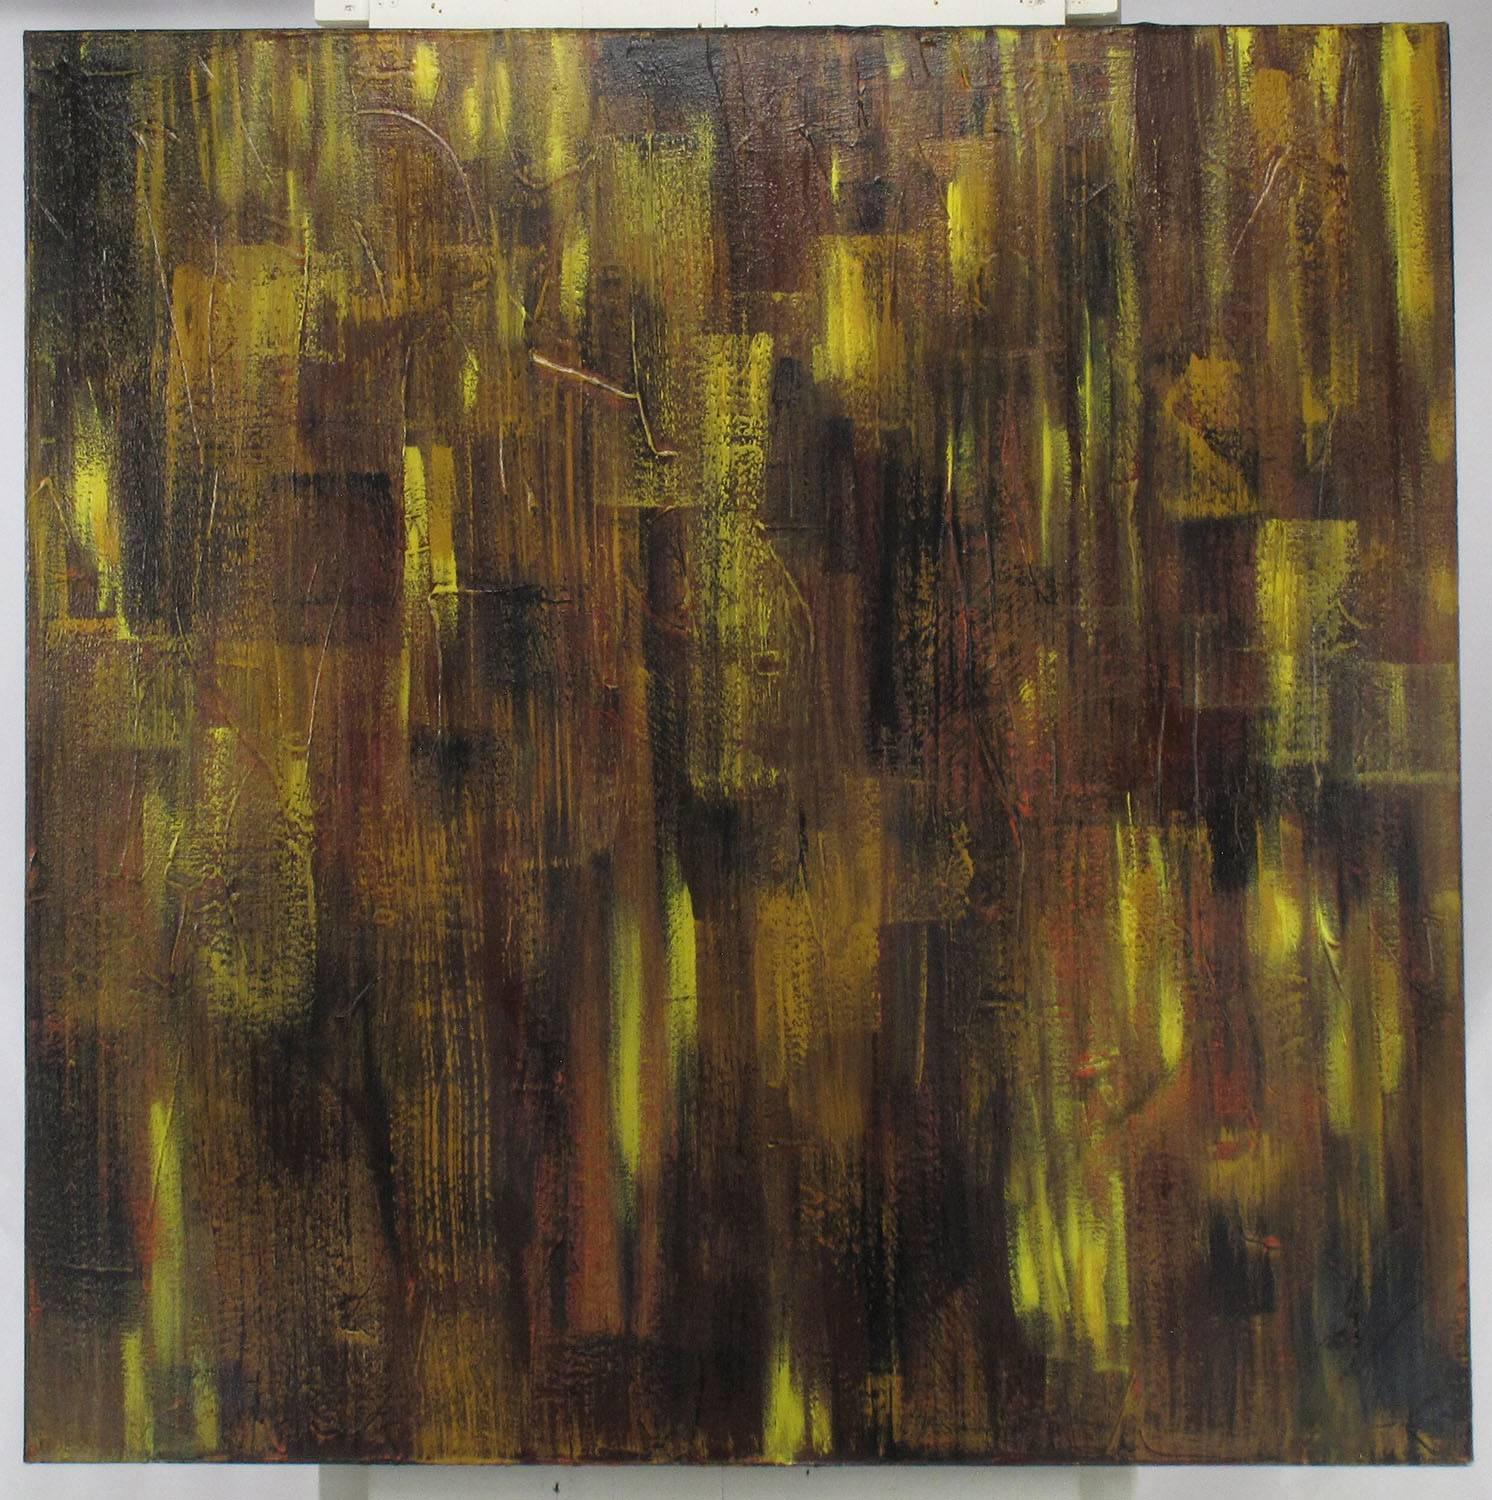 Large abstract expressionist painting using oil on canvas in broad strokes of sienna, yellow, red, black and umber by Chicago and Palm Springs artist Bryan Boomershine. Canvas stretched on a wood frame with black painted borders.

About Bryan